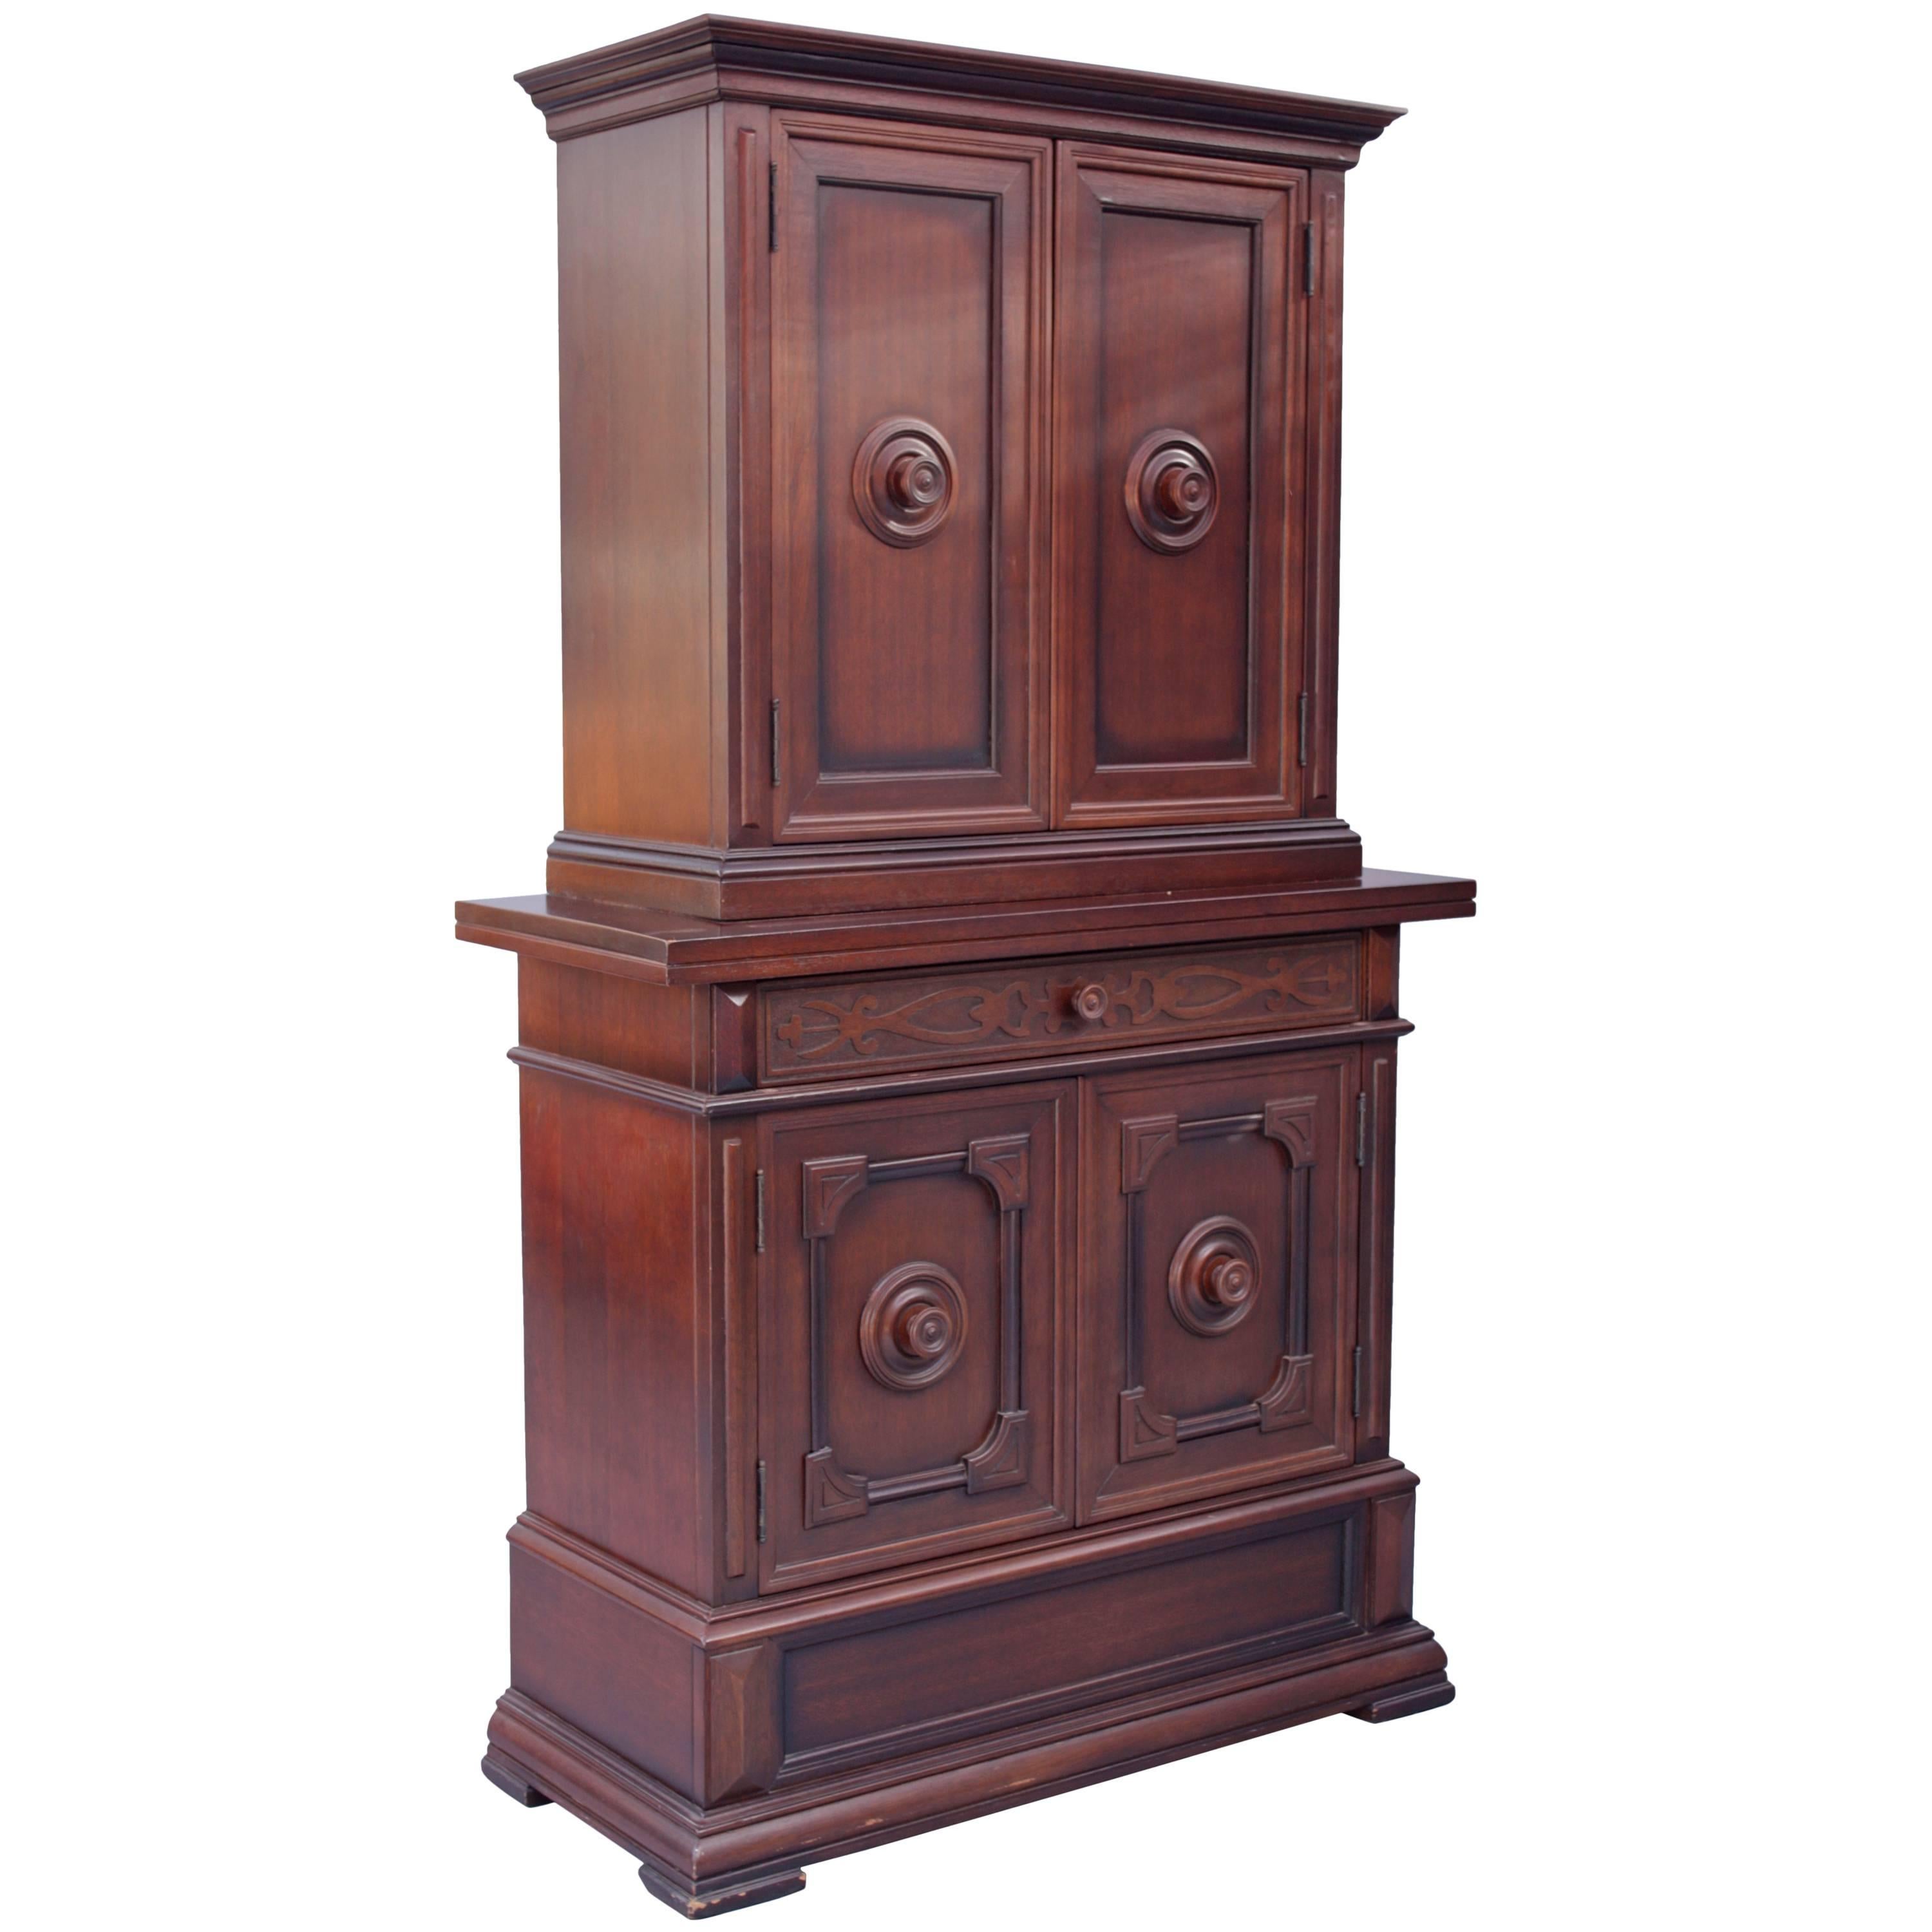 1920s Spanish Revival Standing Cabinet